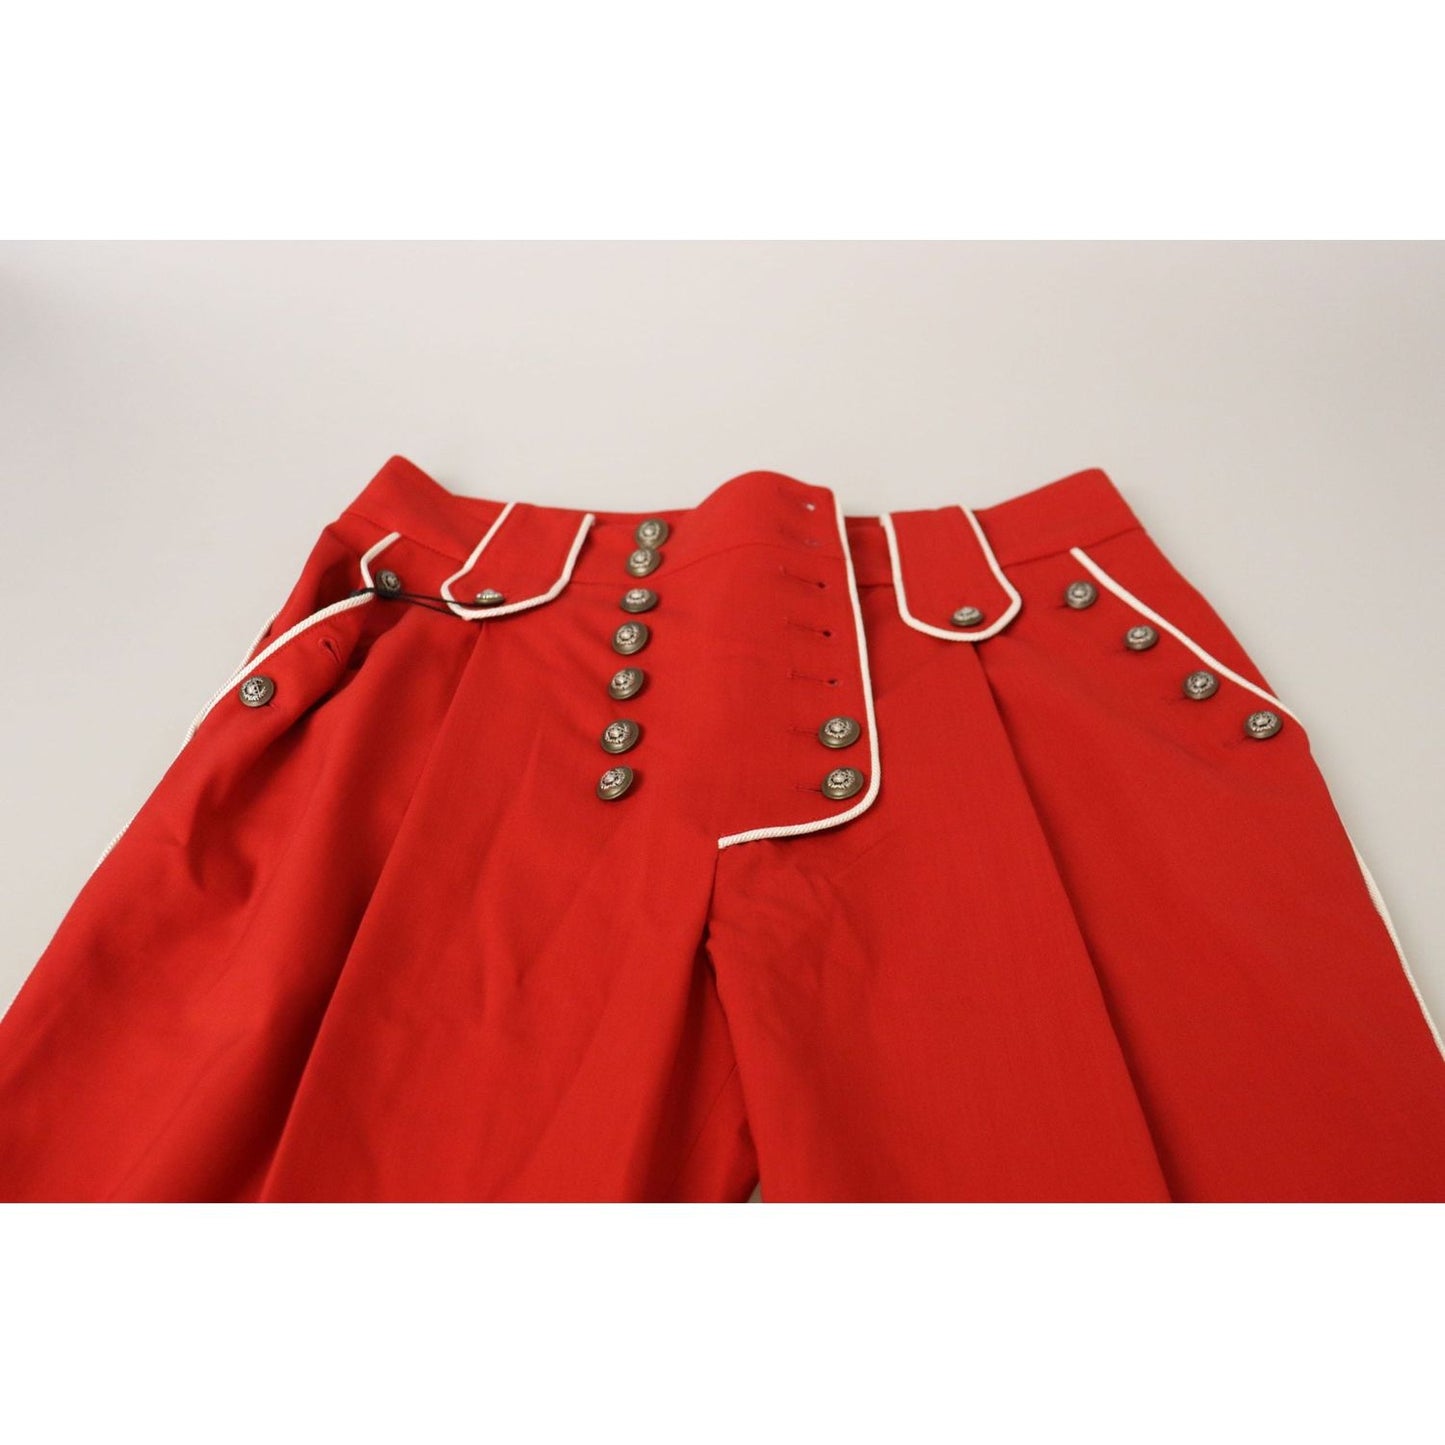 Dolce & Gabbana Elegant Red High-Waist Cropped Pants red-button-embellished-high-waist-pants